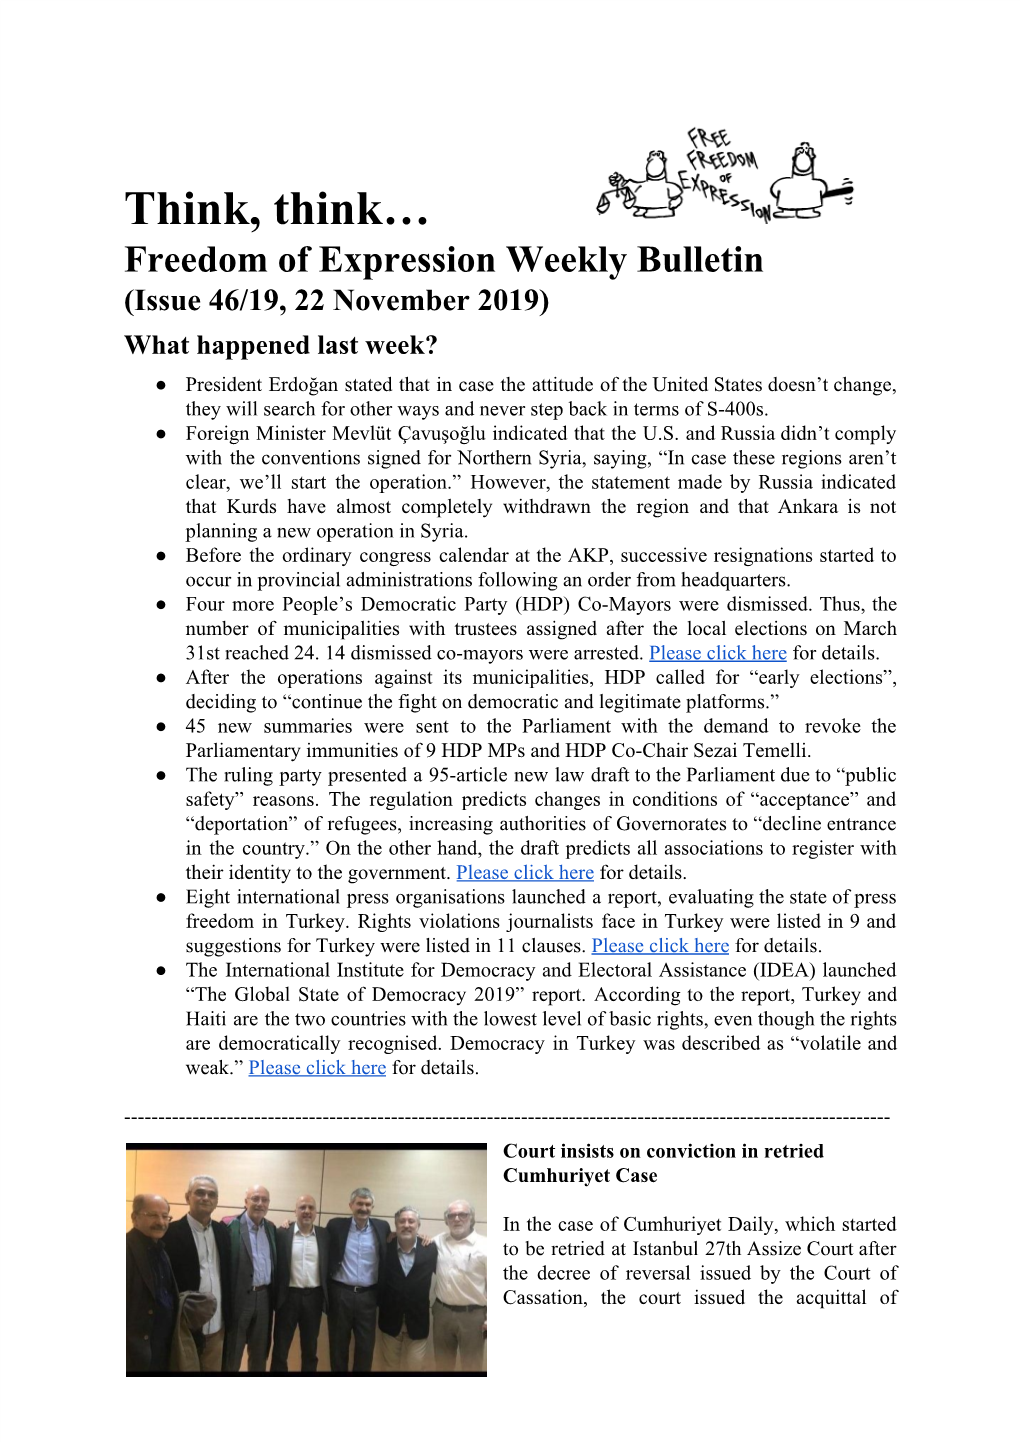 Think, Think… Freedom of Expression Weekly Bulletin (Issue 46/19, 22 November 2019)